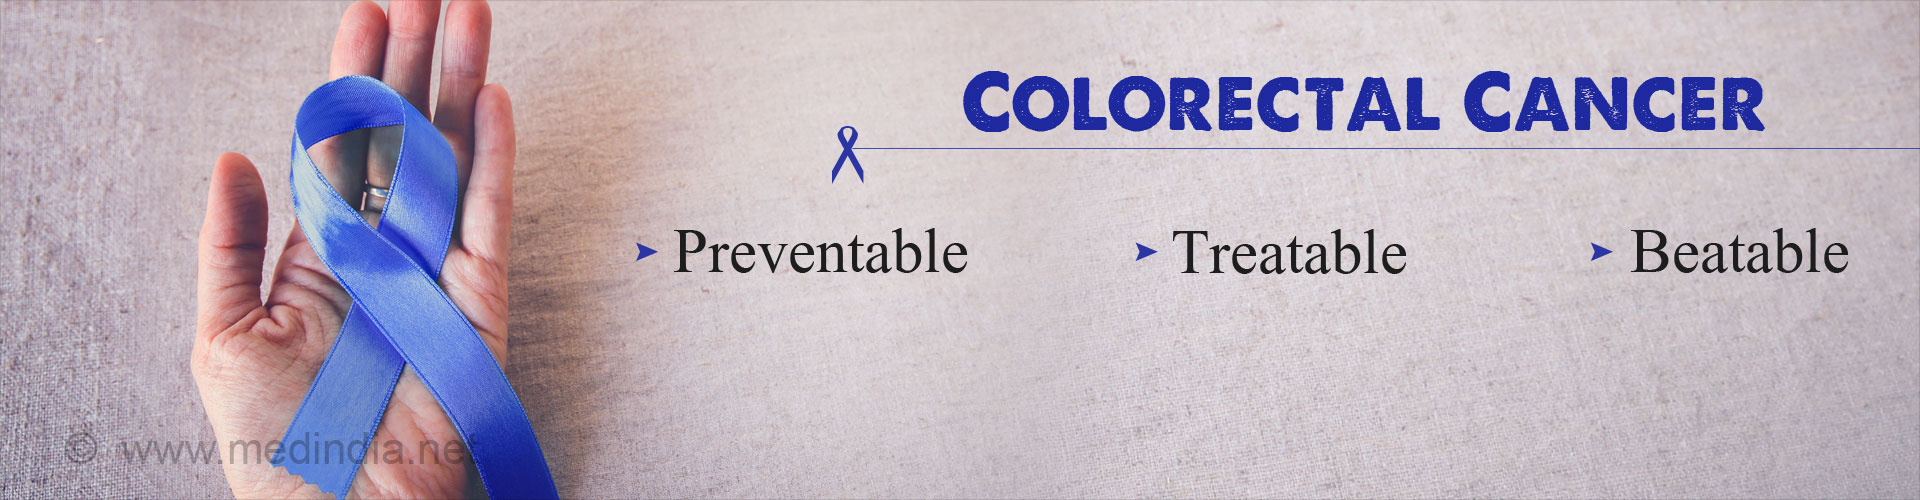 Health Tip on Awareness of Colorectal Cancer